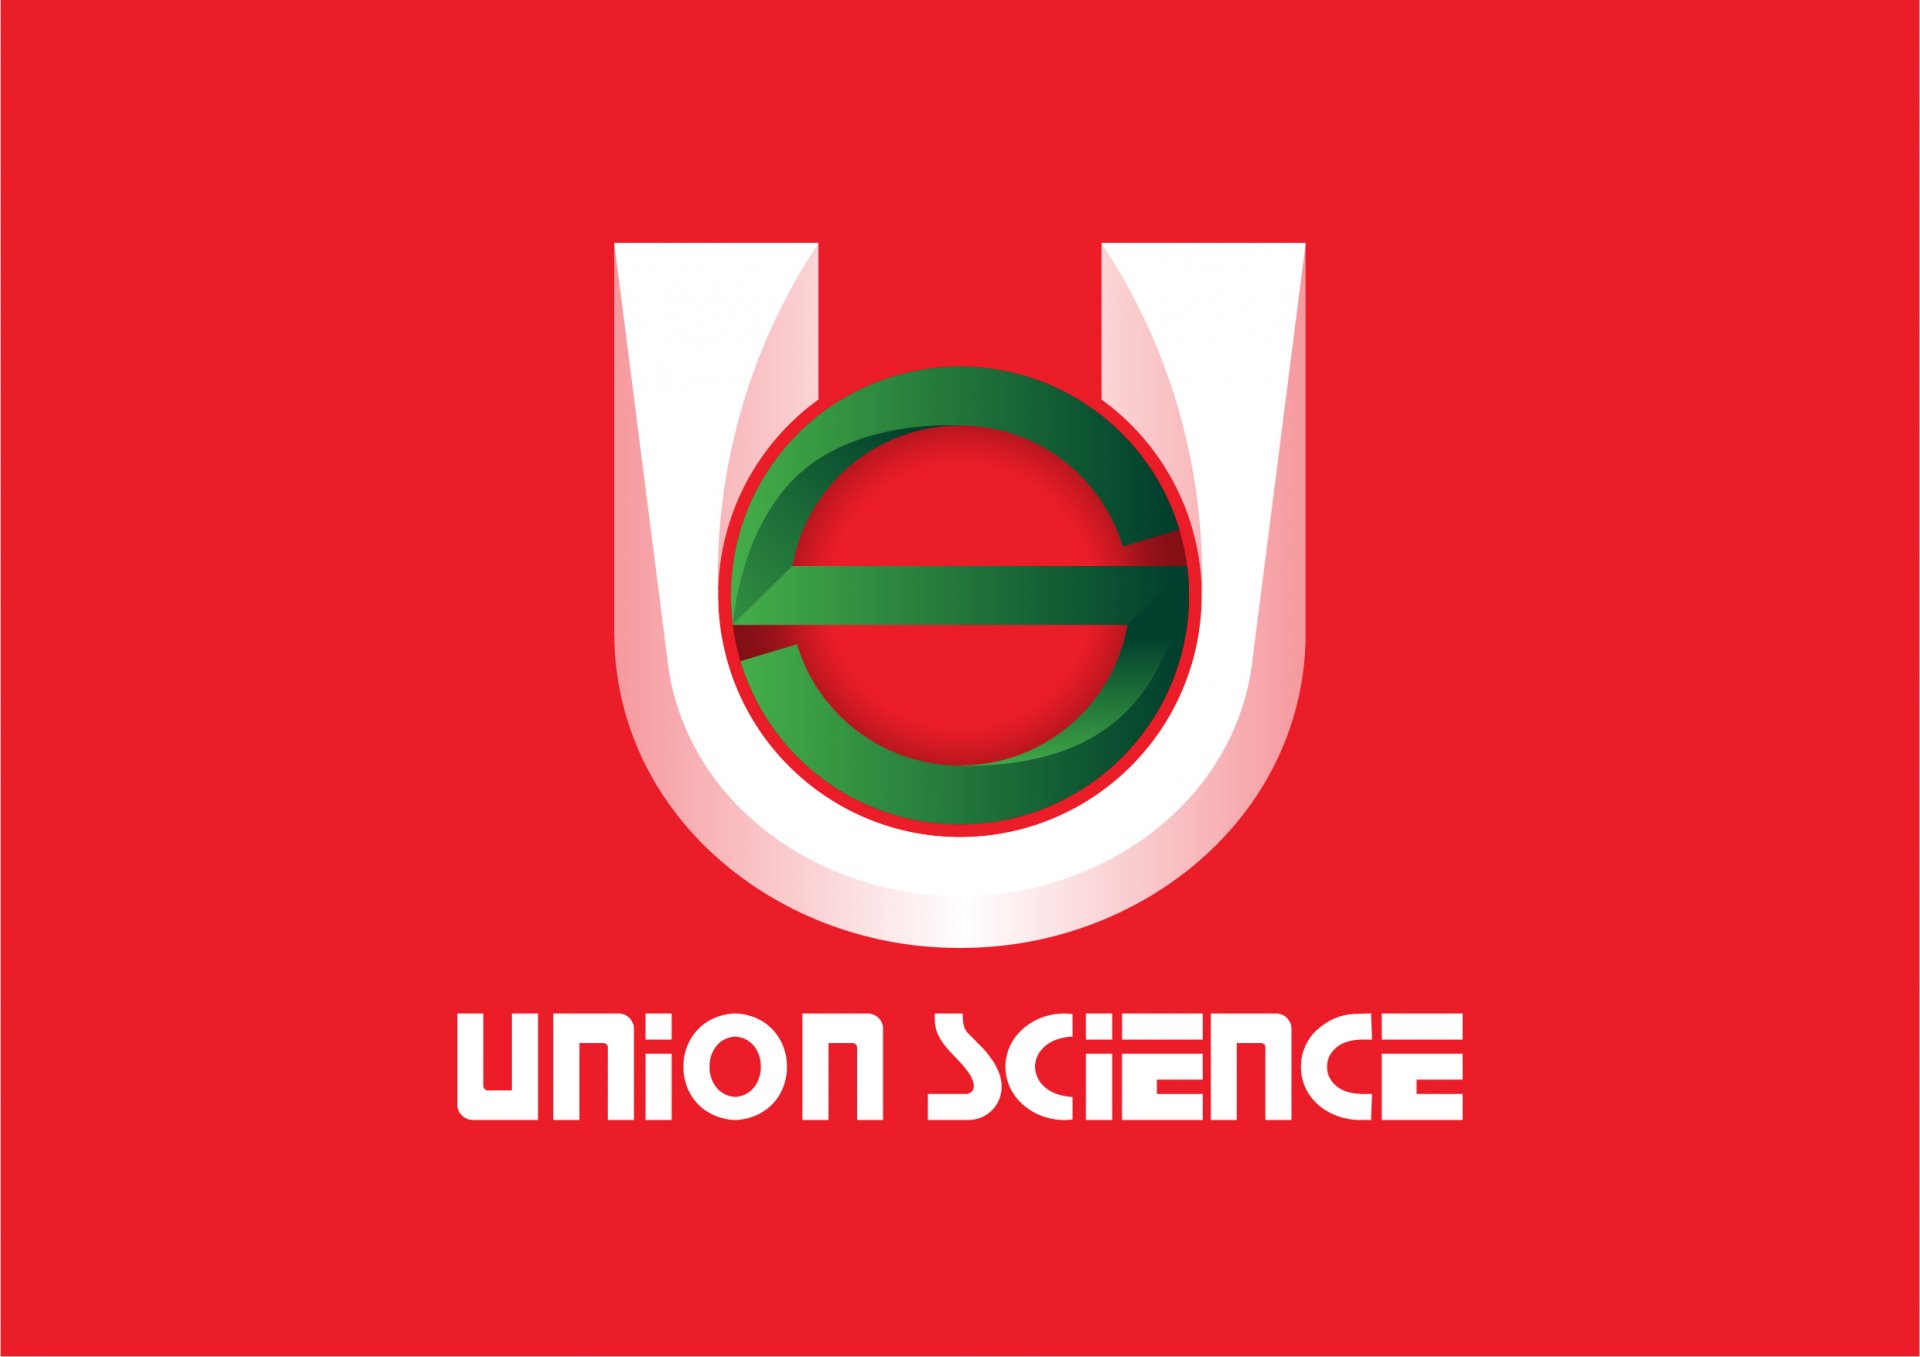 UNION_SCIENCE_BRAND_GUIDELINE_APPROVED-01.jpg